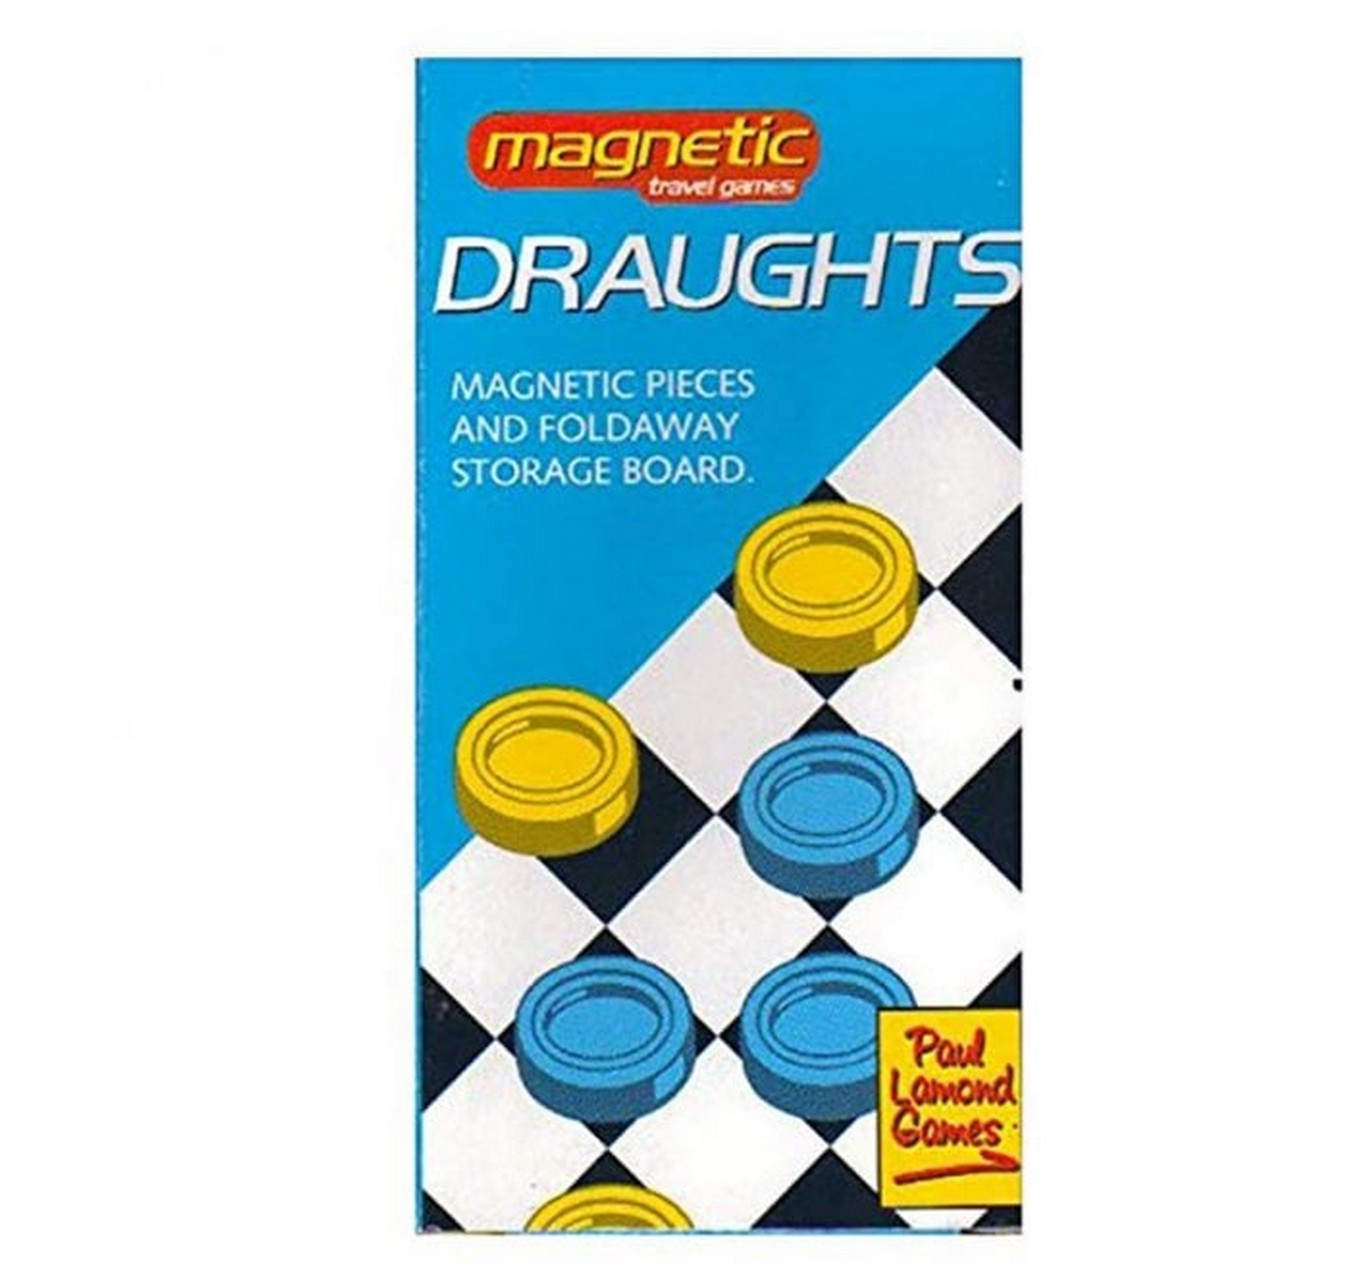 Magnetic Draughts Travel Game